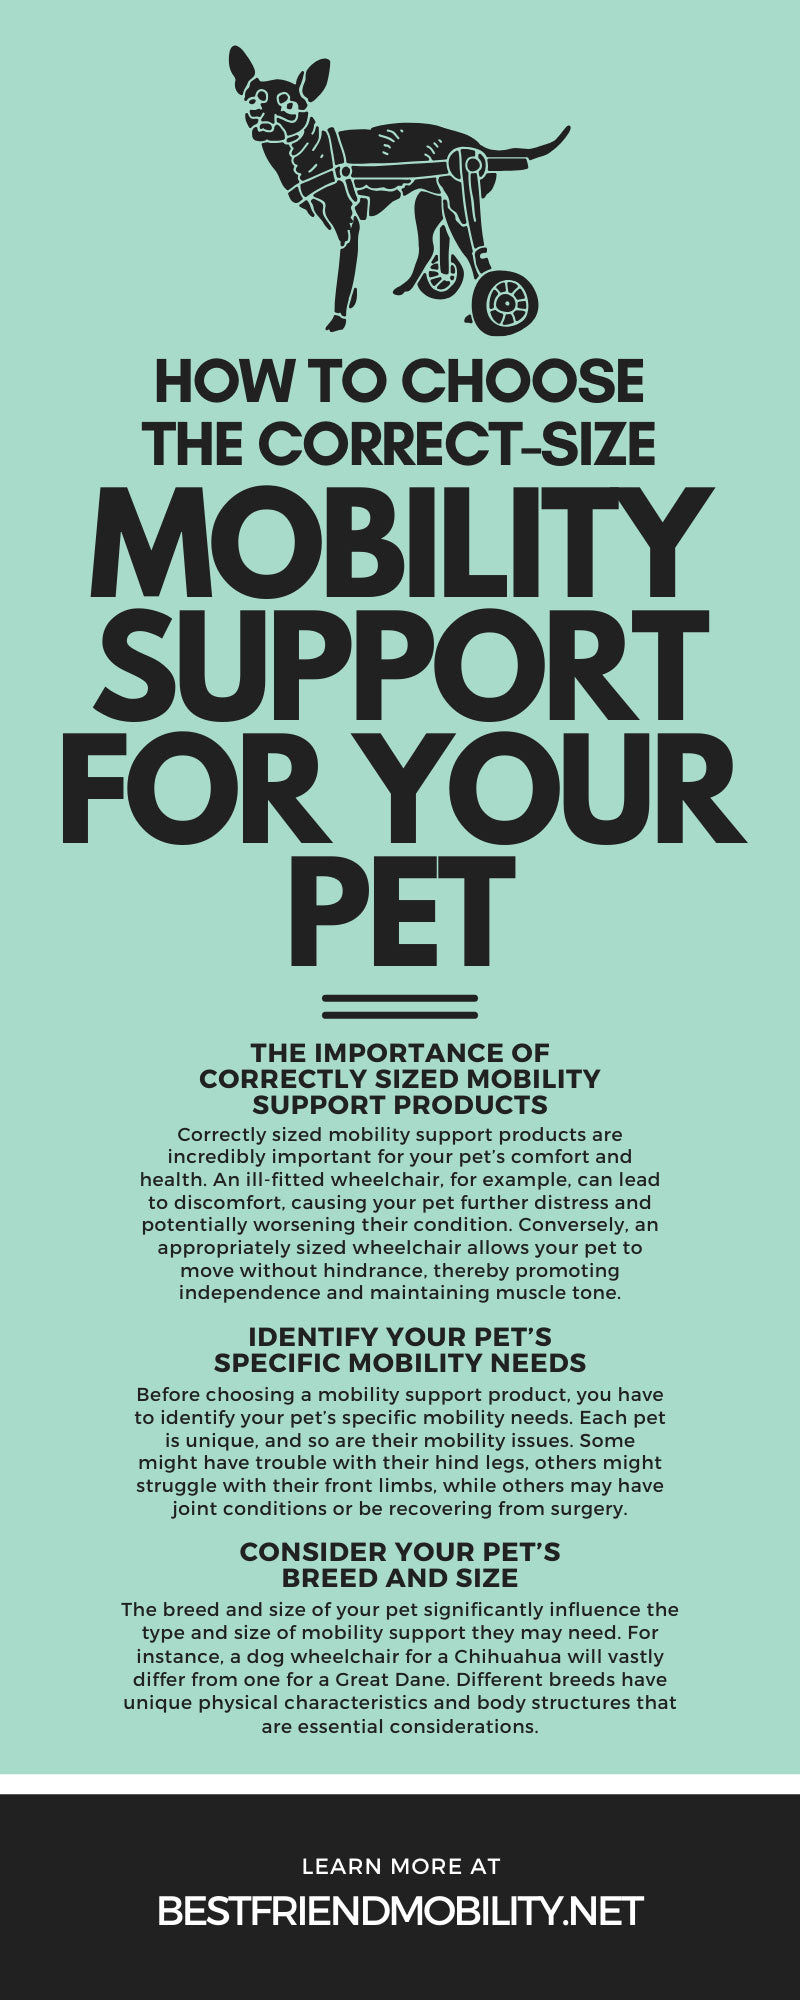 How To Choose the Correct-Size Mobility Support for Your Pet